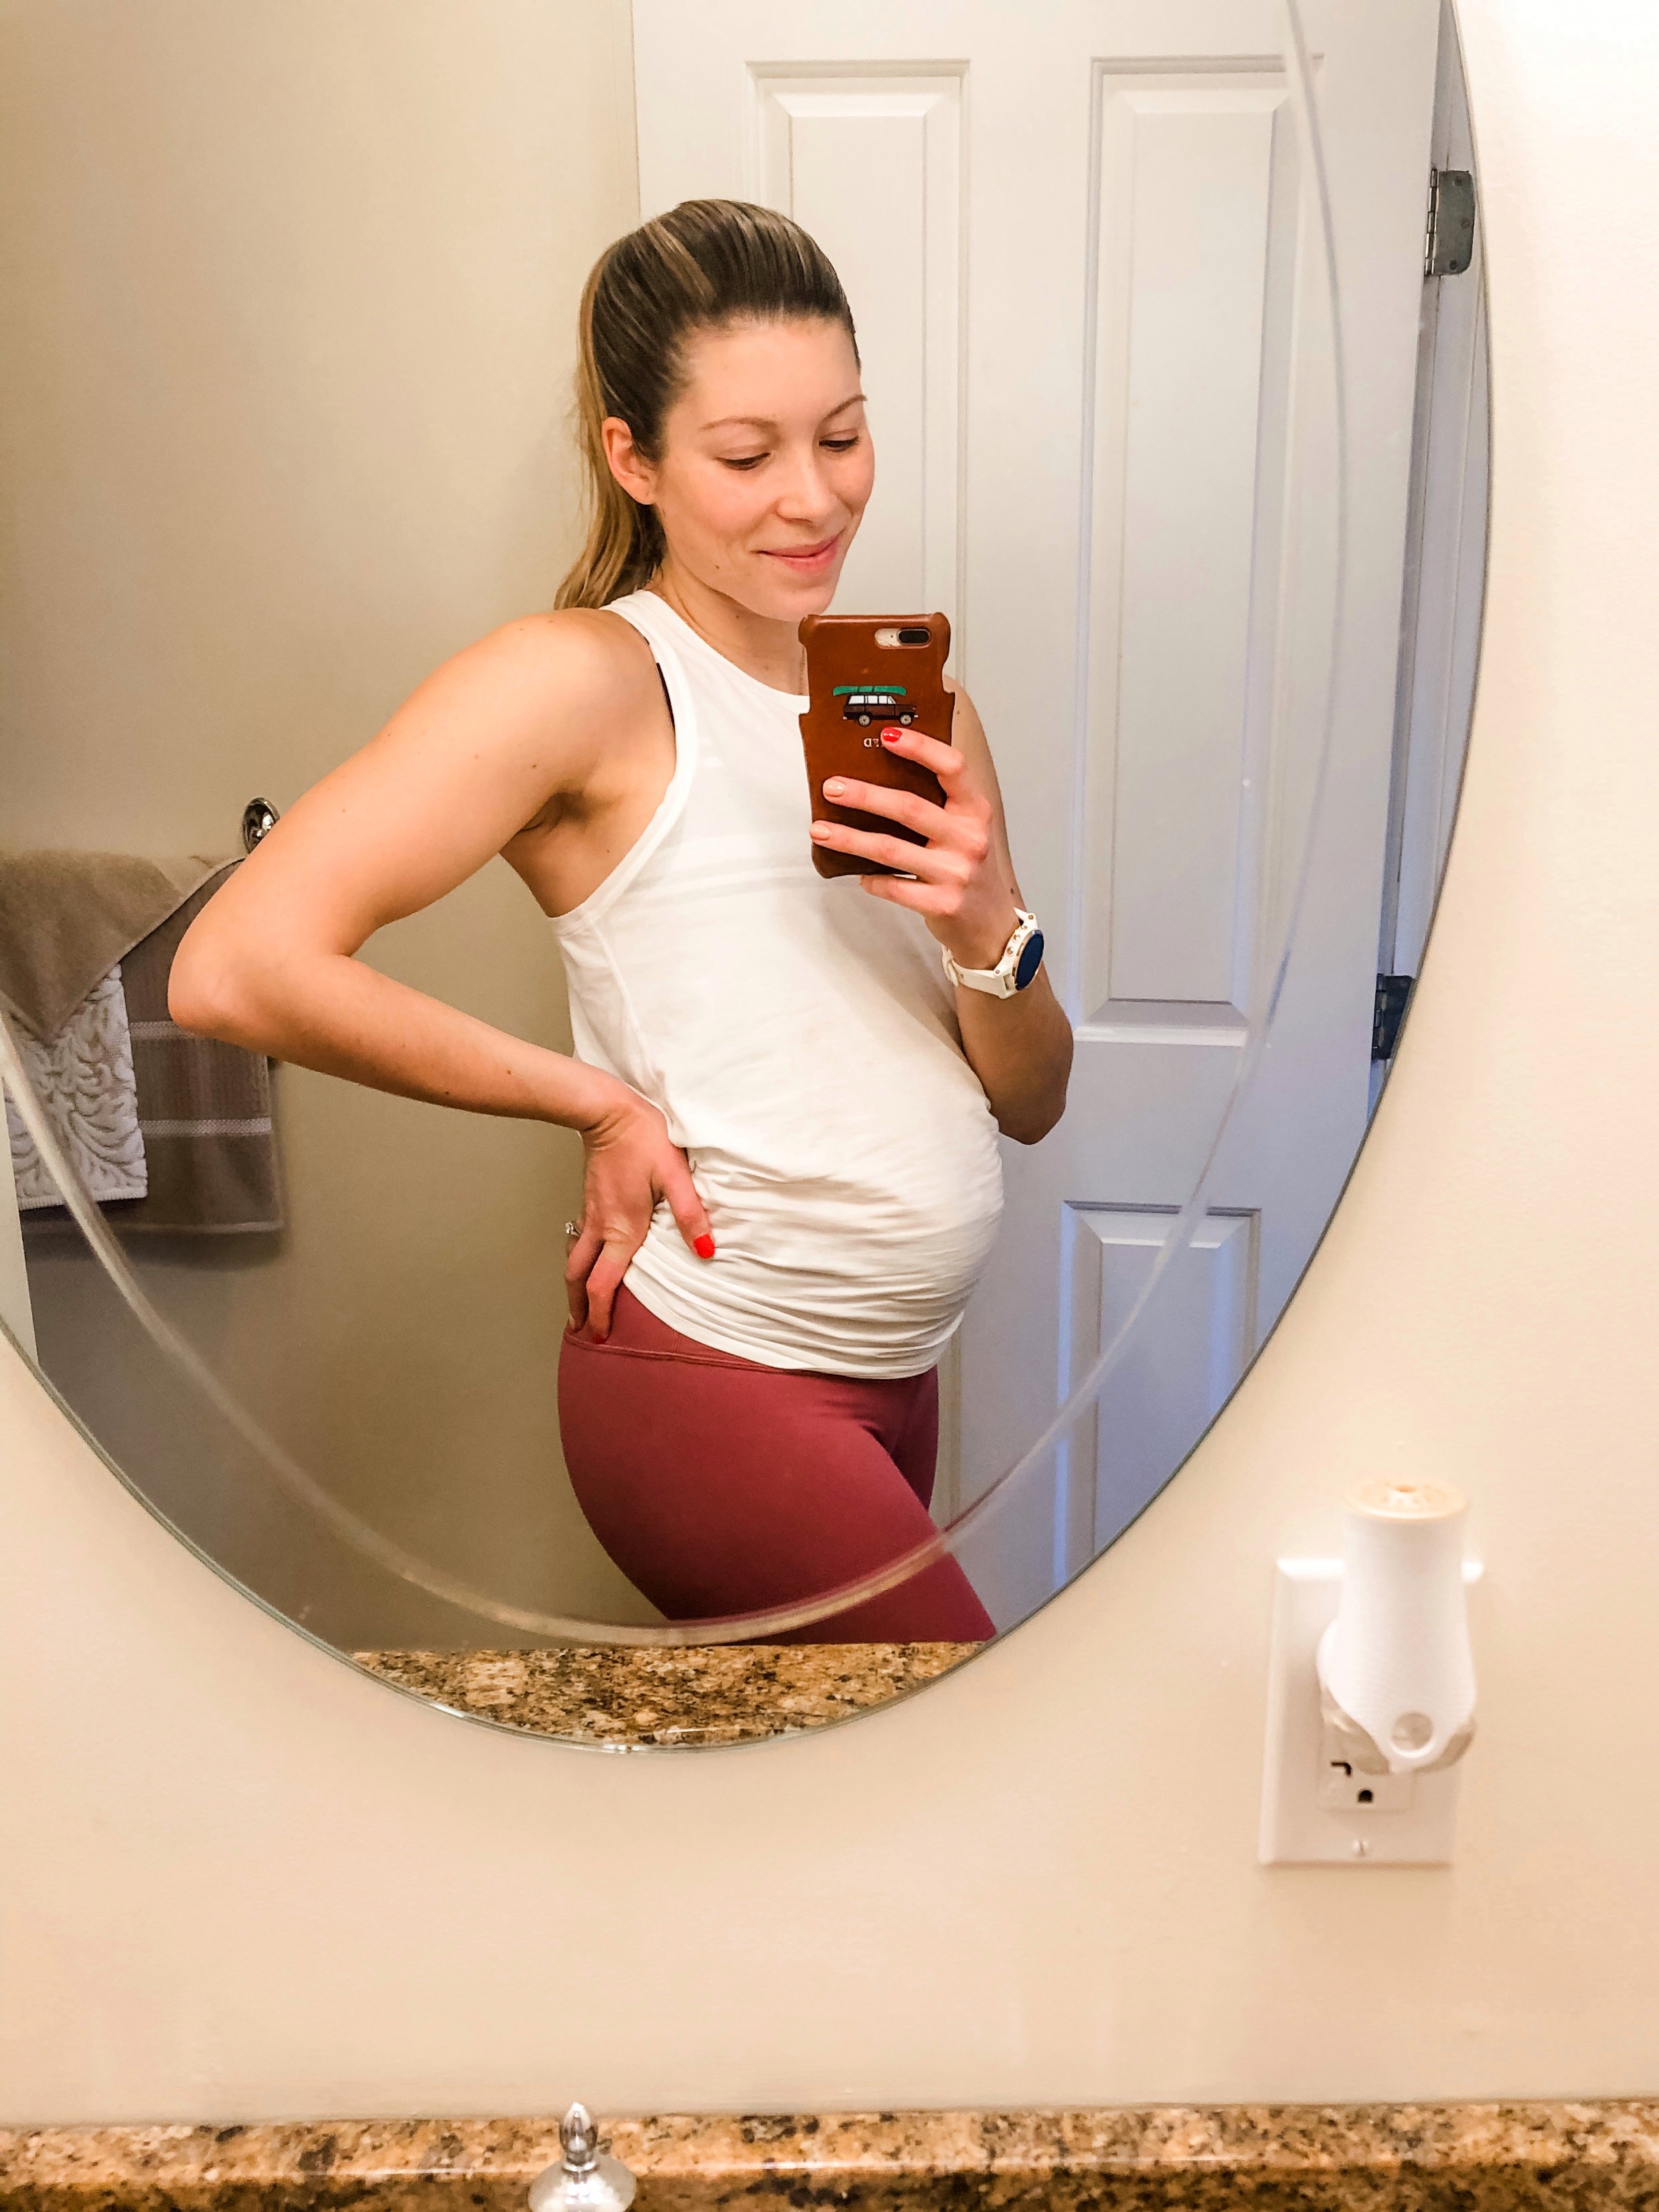 Should you run while pregnant?